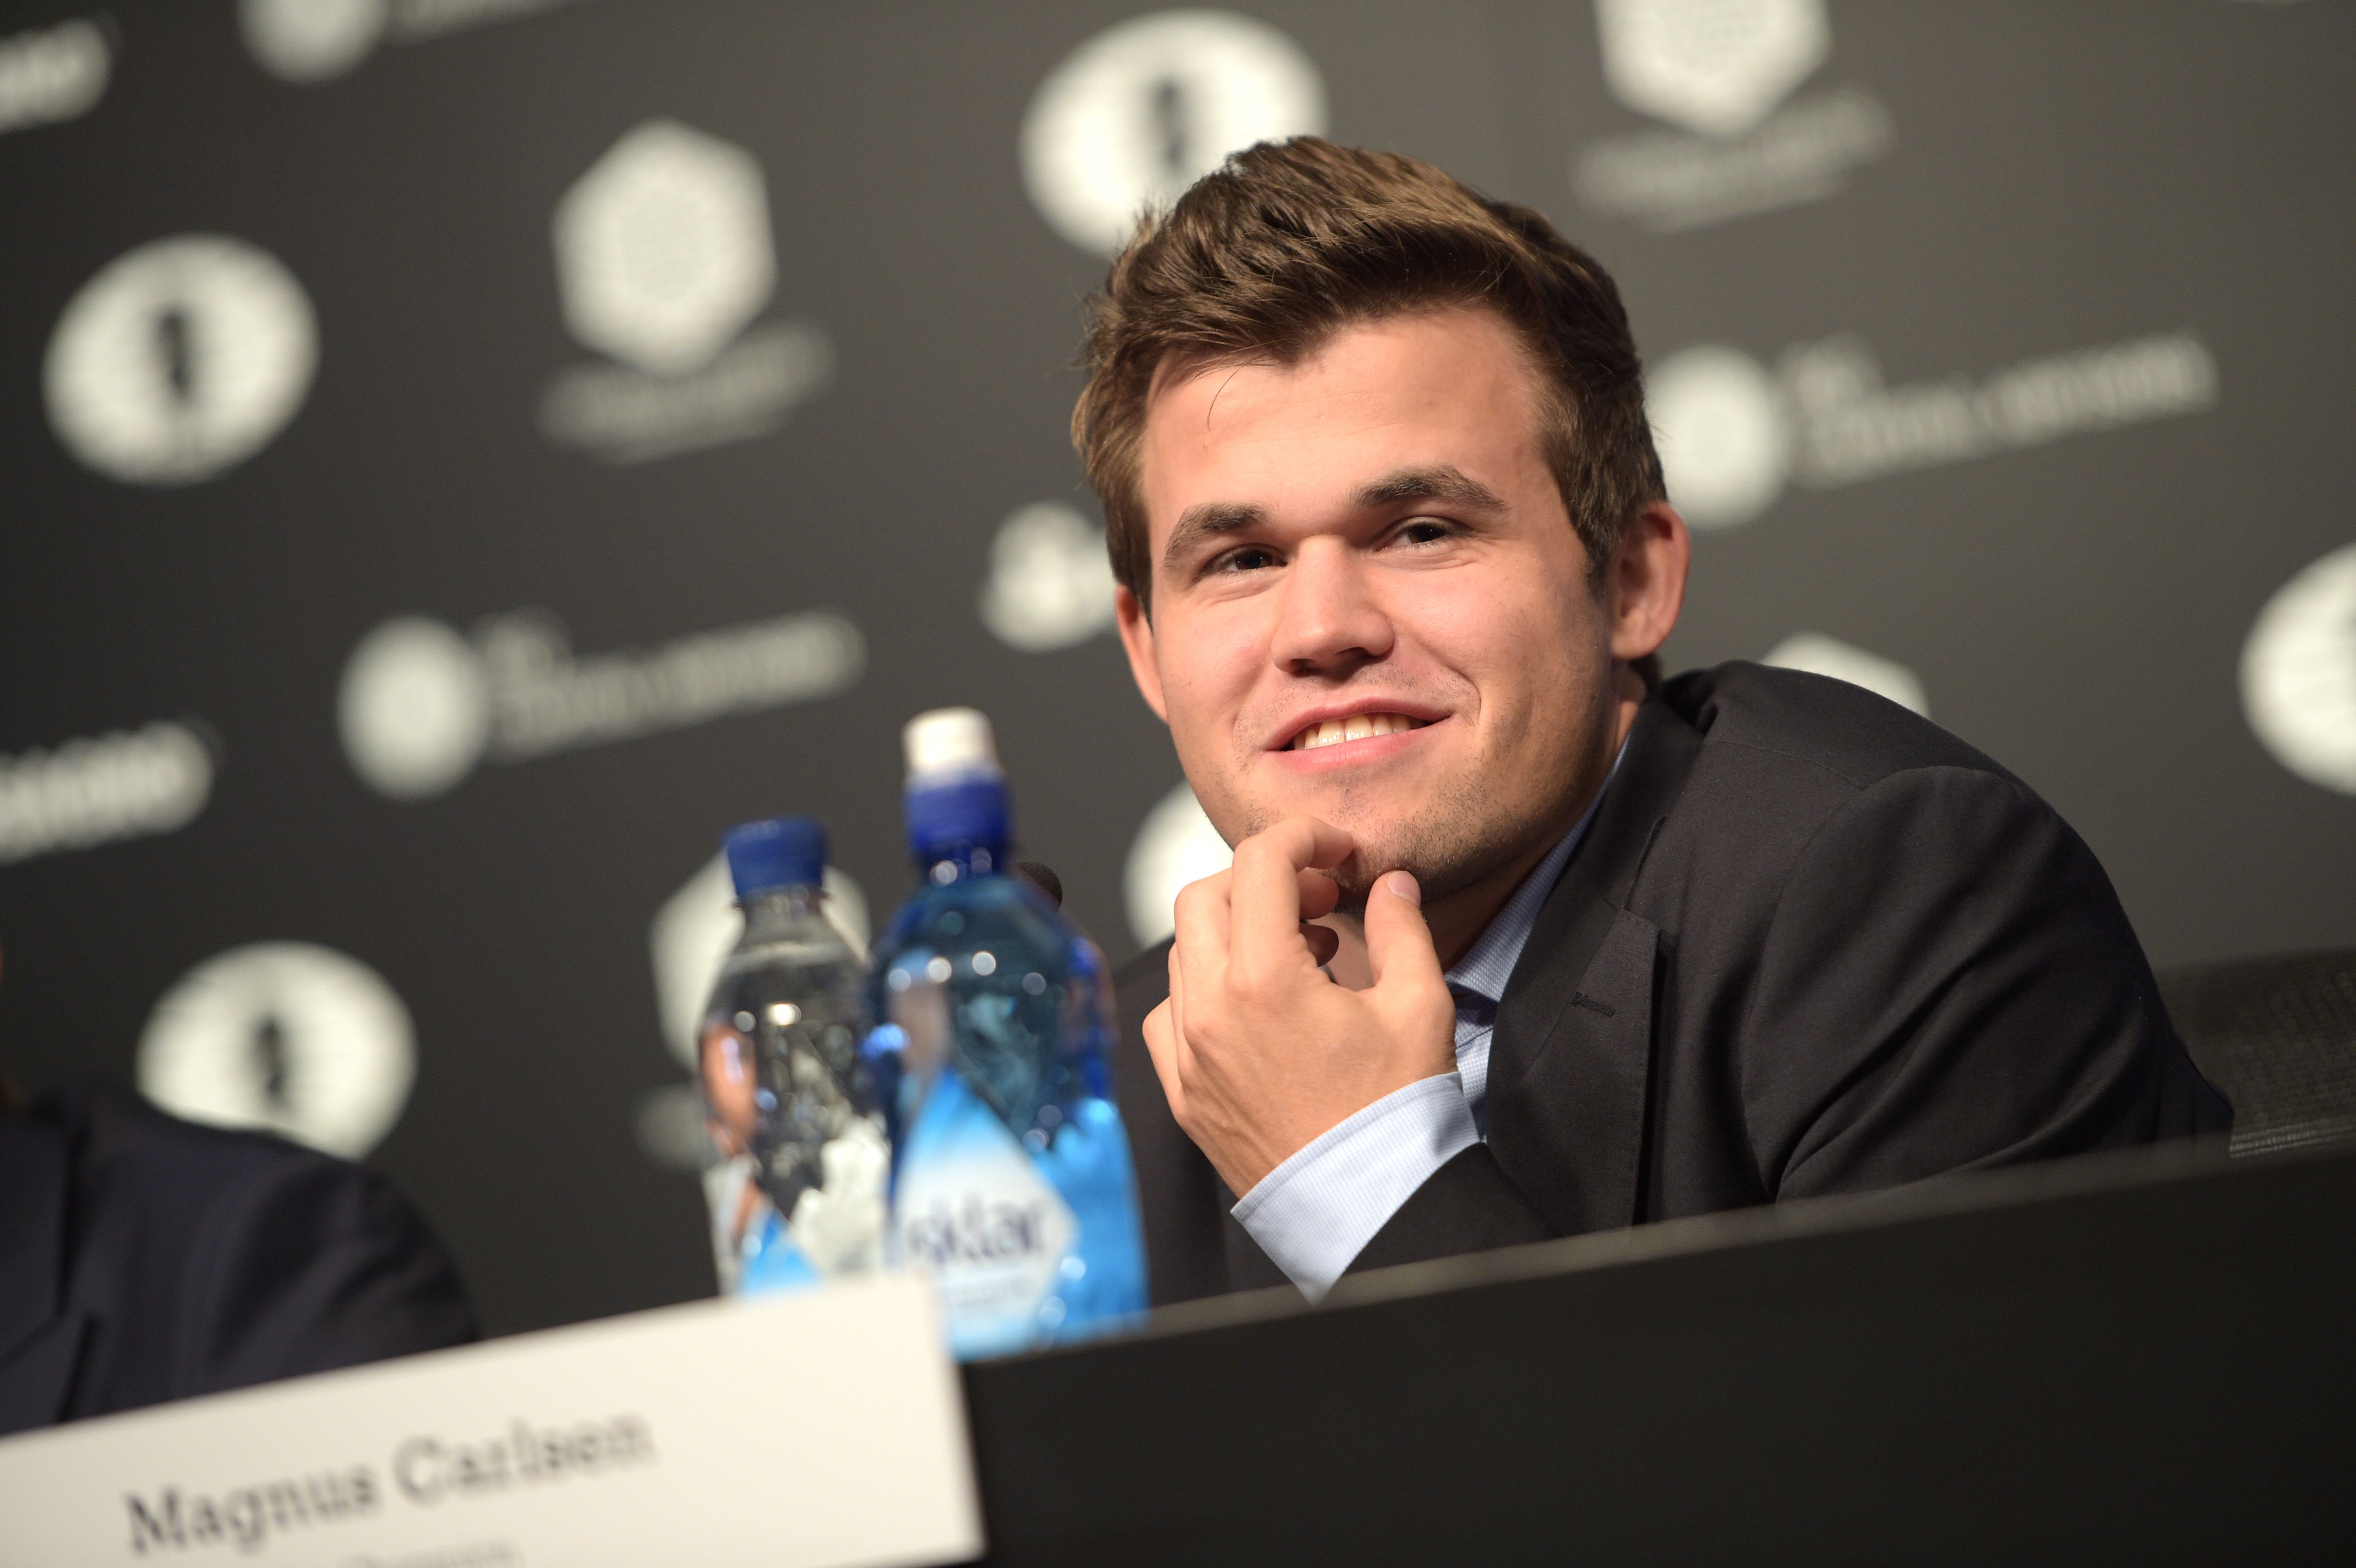 SMCA - 7 Reasons Why Magnus Carlsen Plays Better Chess Than You